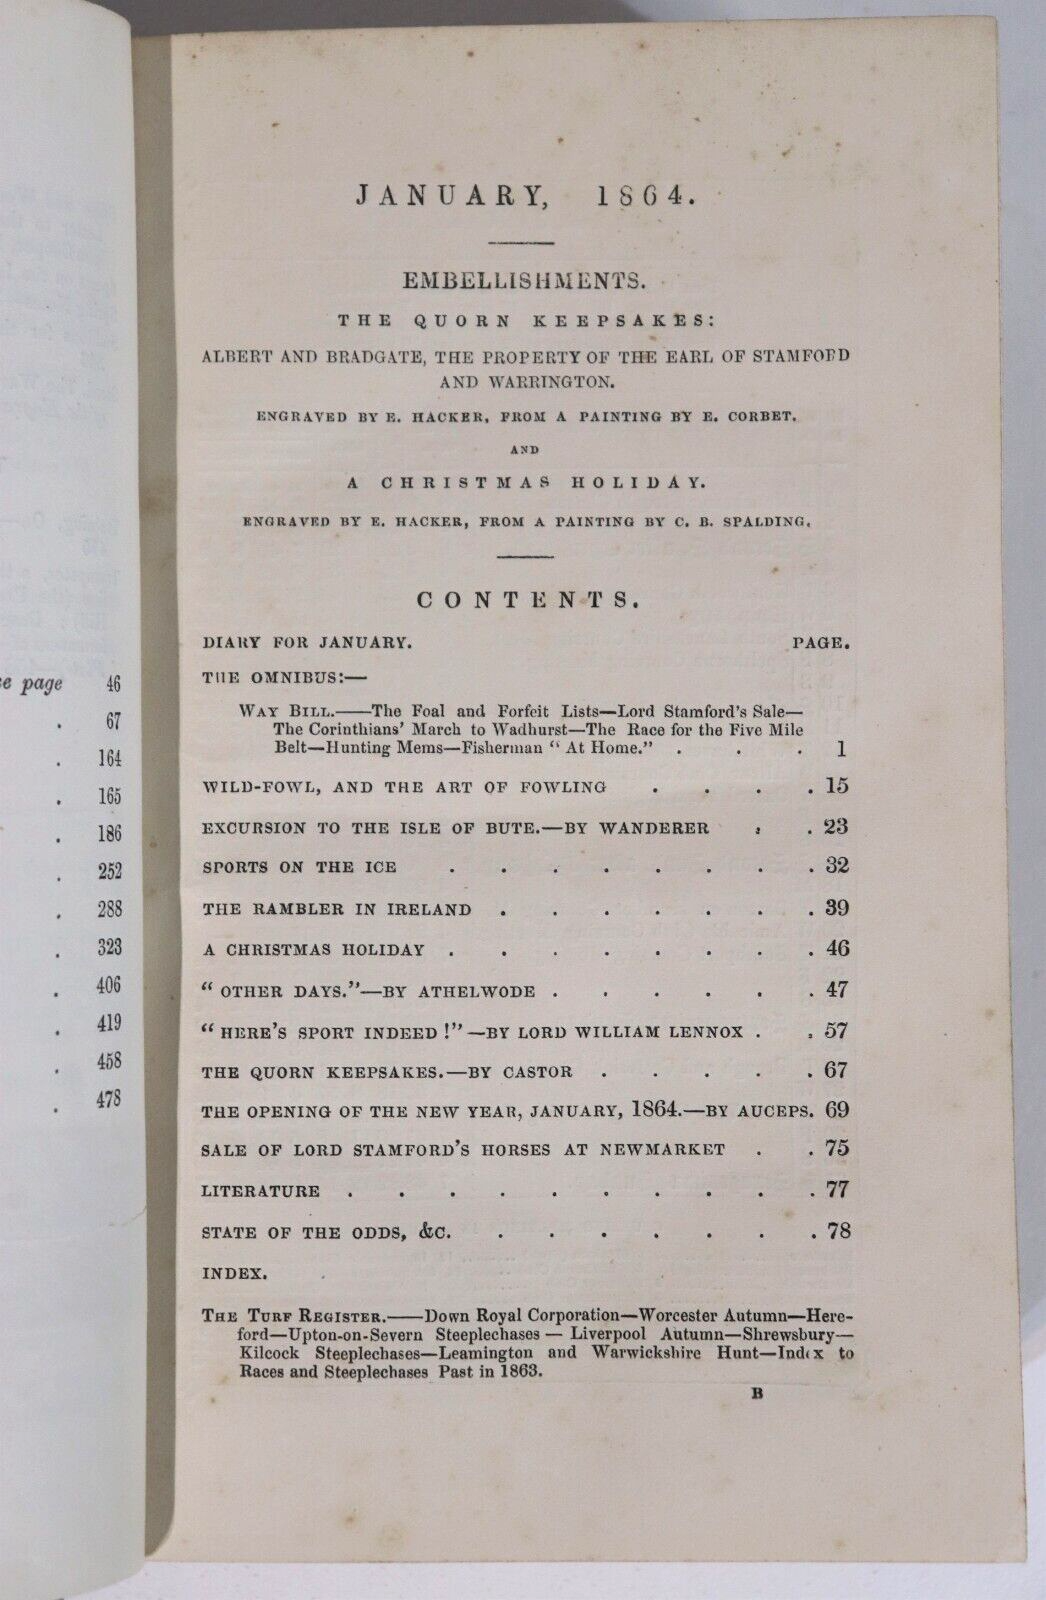 The Sporting Magazine & Sporting Review - 1864 - Antiquarian Sport History Book